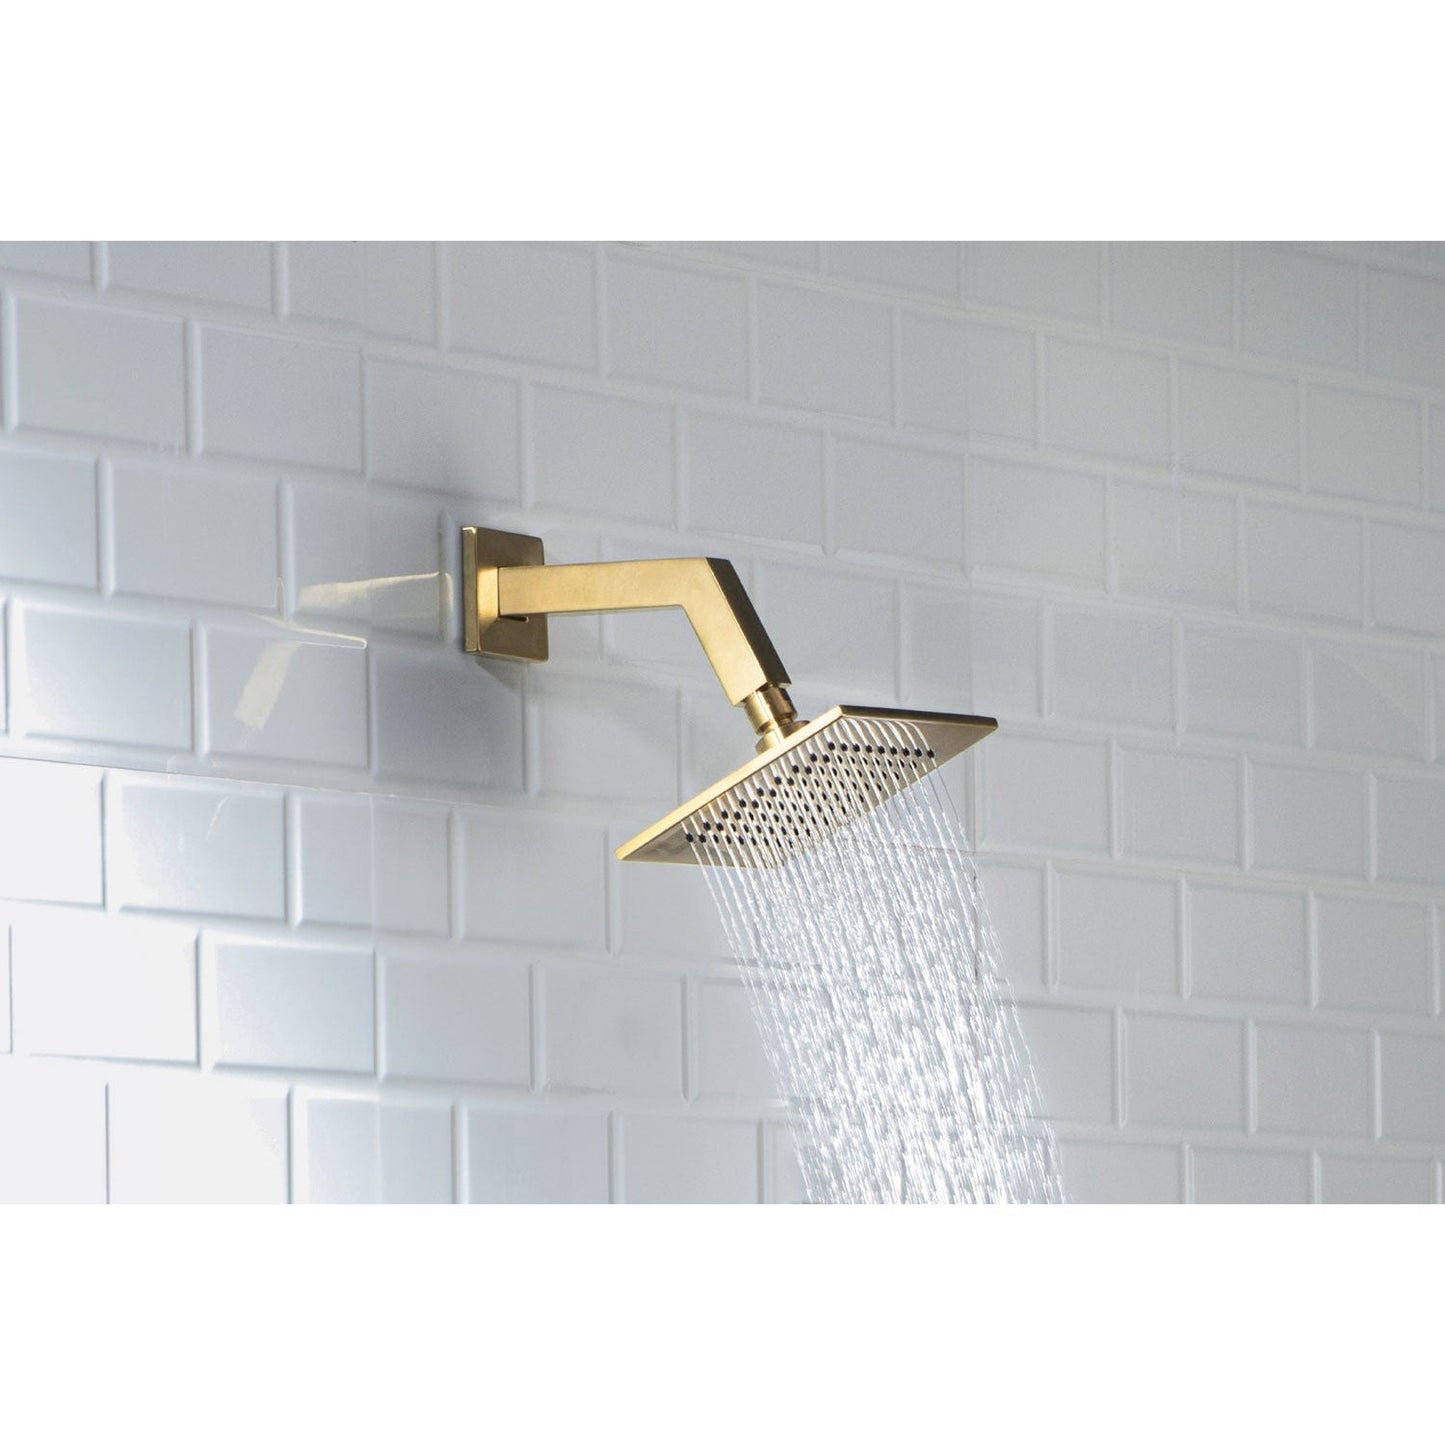 Isenberg Universal Fixtures 6" Single Function Square Matte Black Solid Brass Rain Shower Head With 8" Wall Mounted Shower Arm